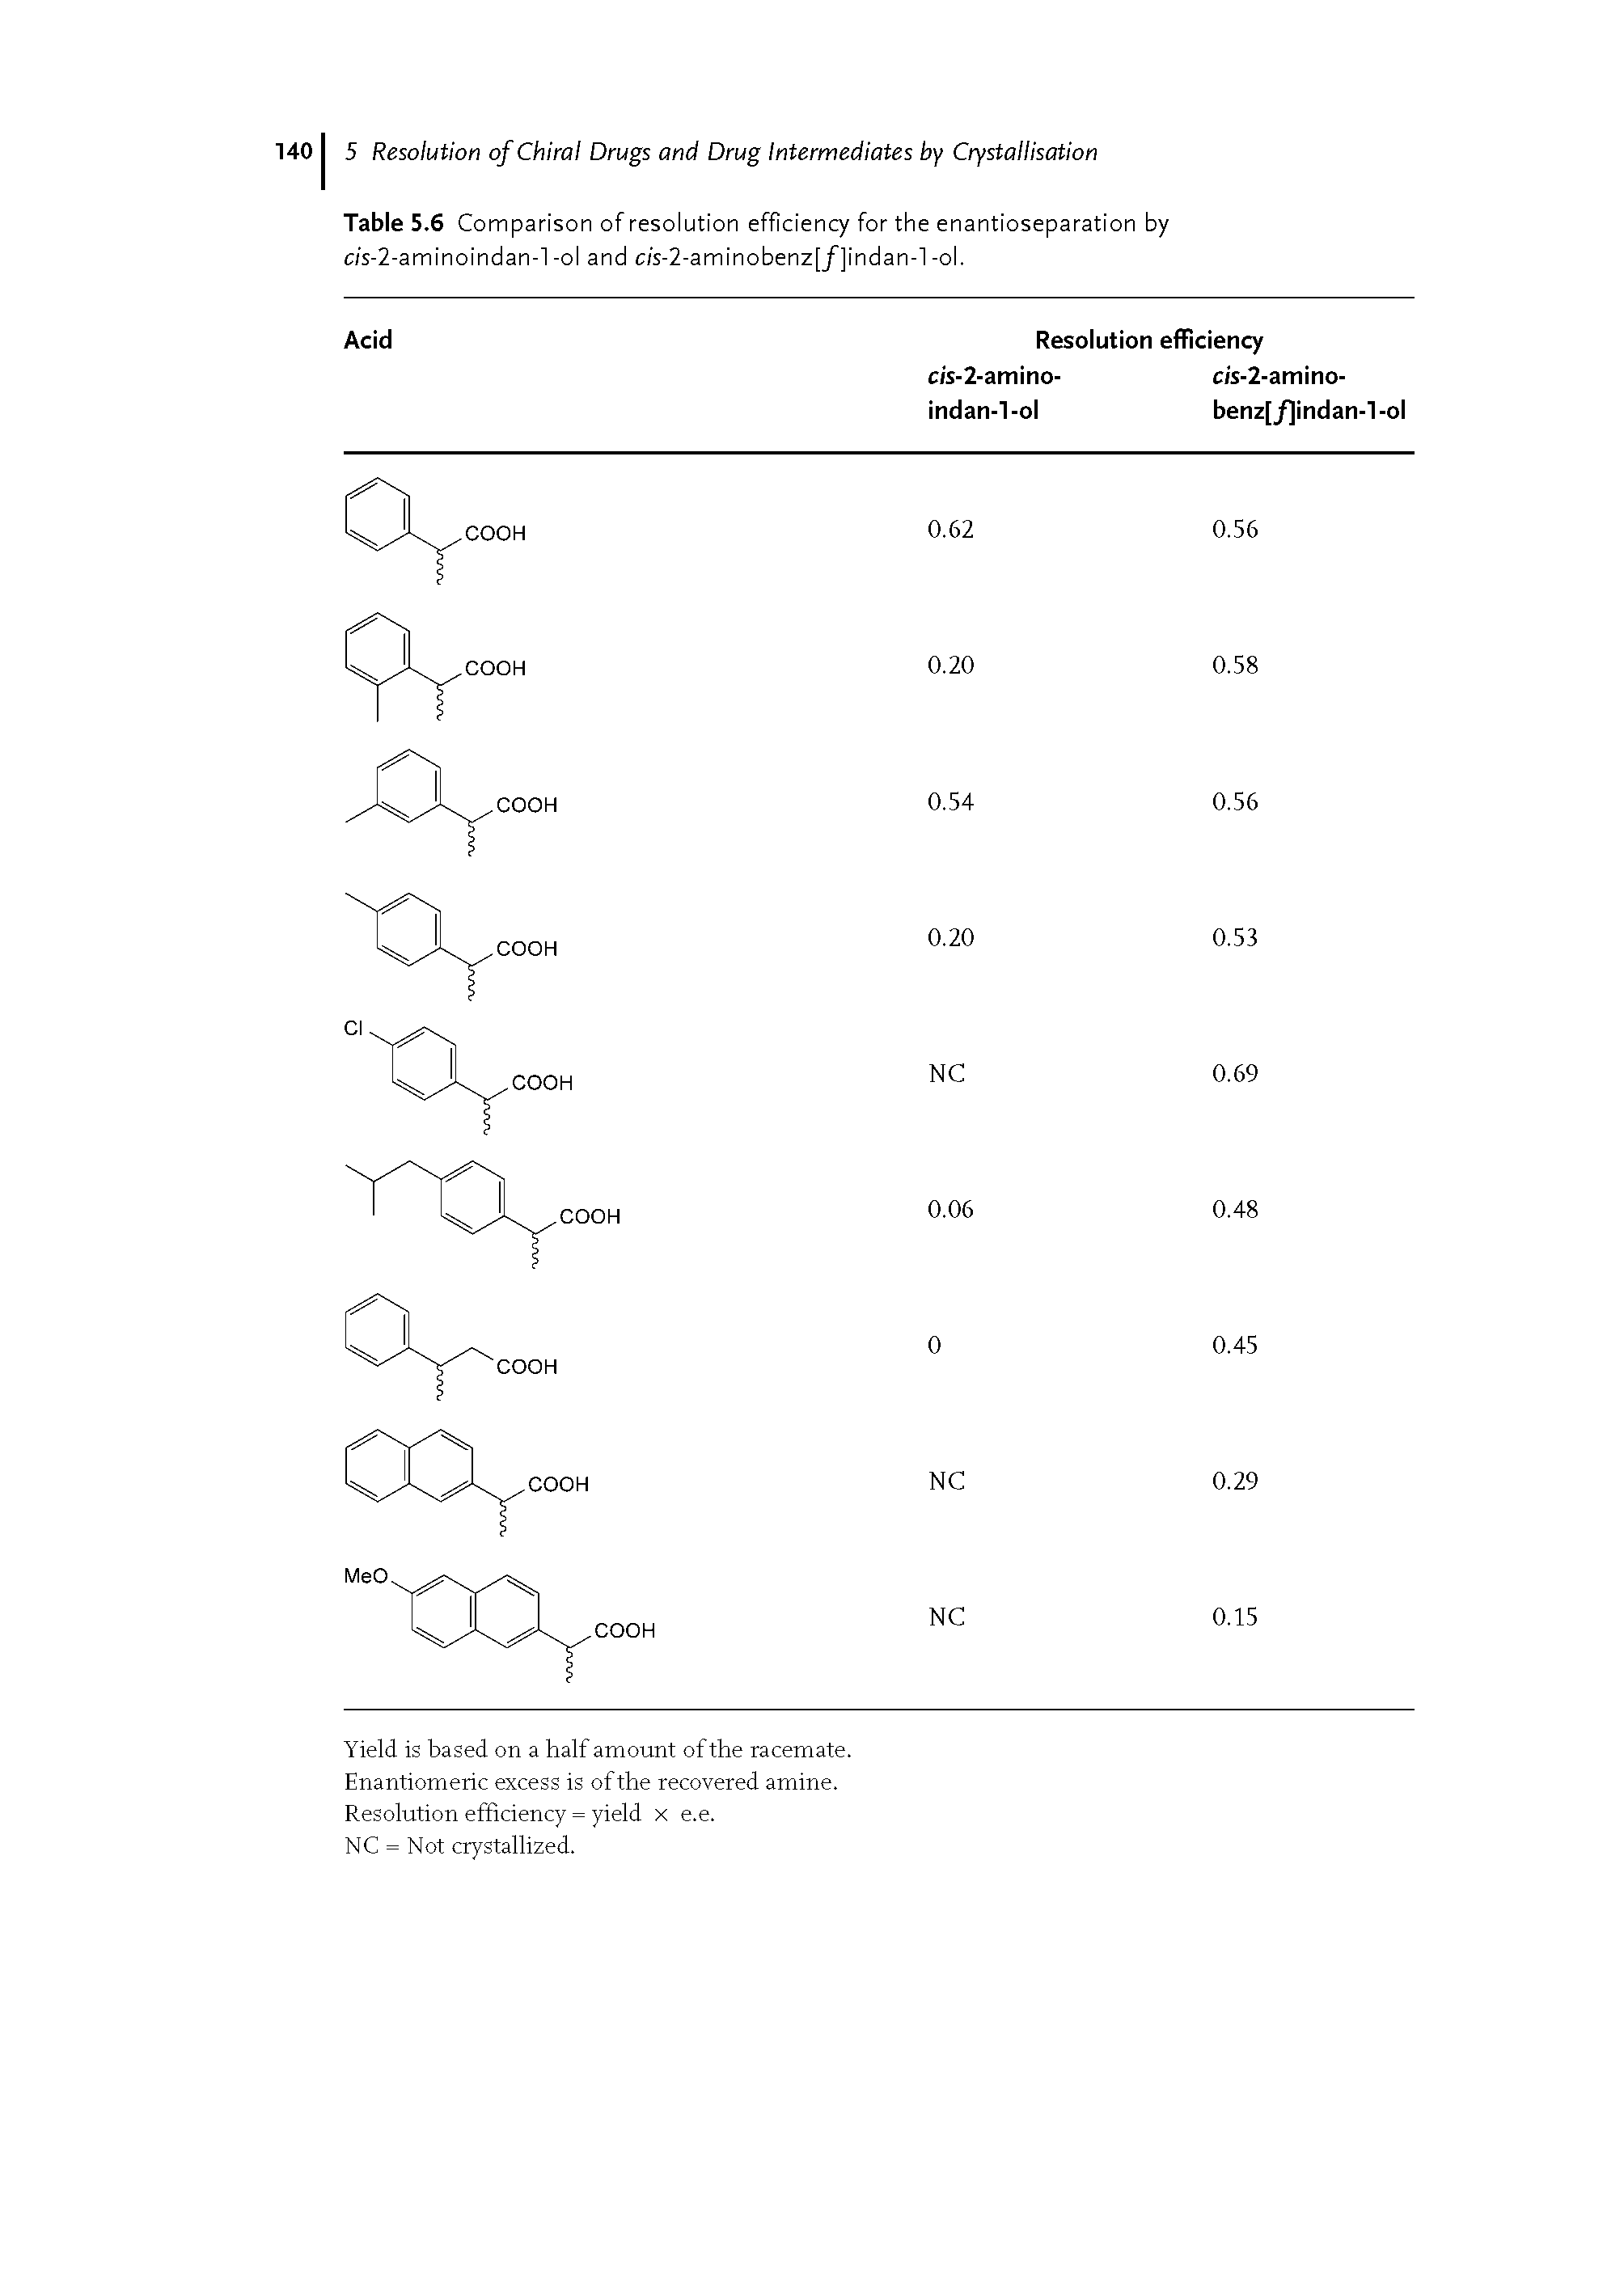 Table 5.6 Comparison of resolution efficiency for the enantioseparation by cis-2-aminoindan-l-ol and cis-2-aminobenz[/]indan-l-ol.